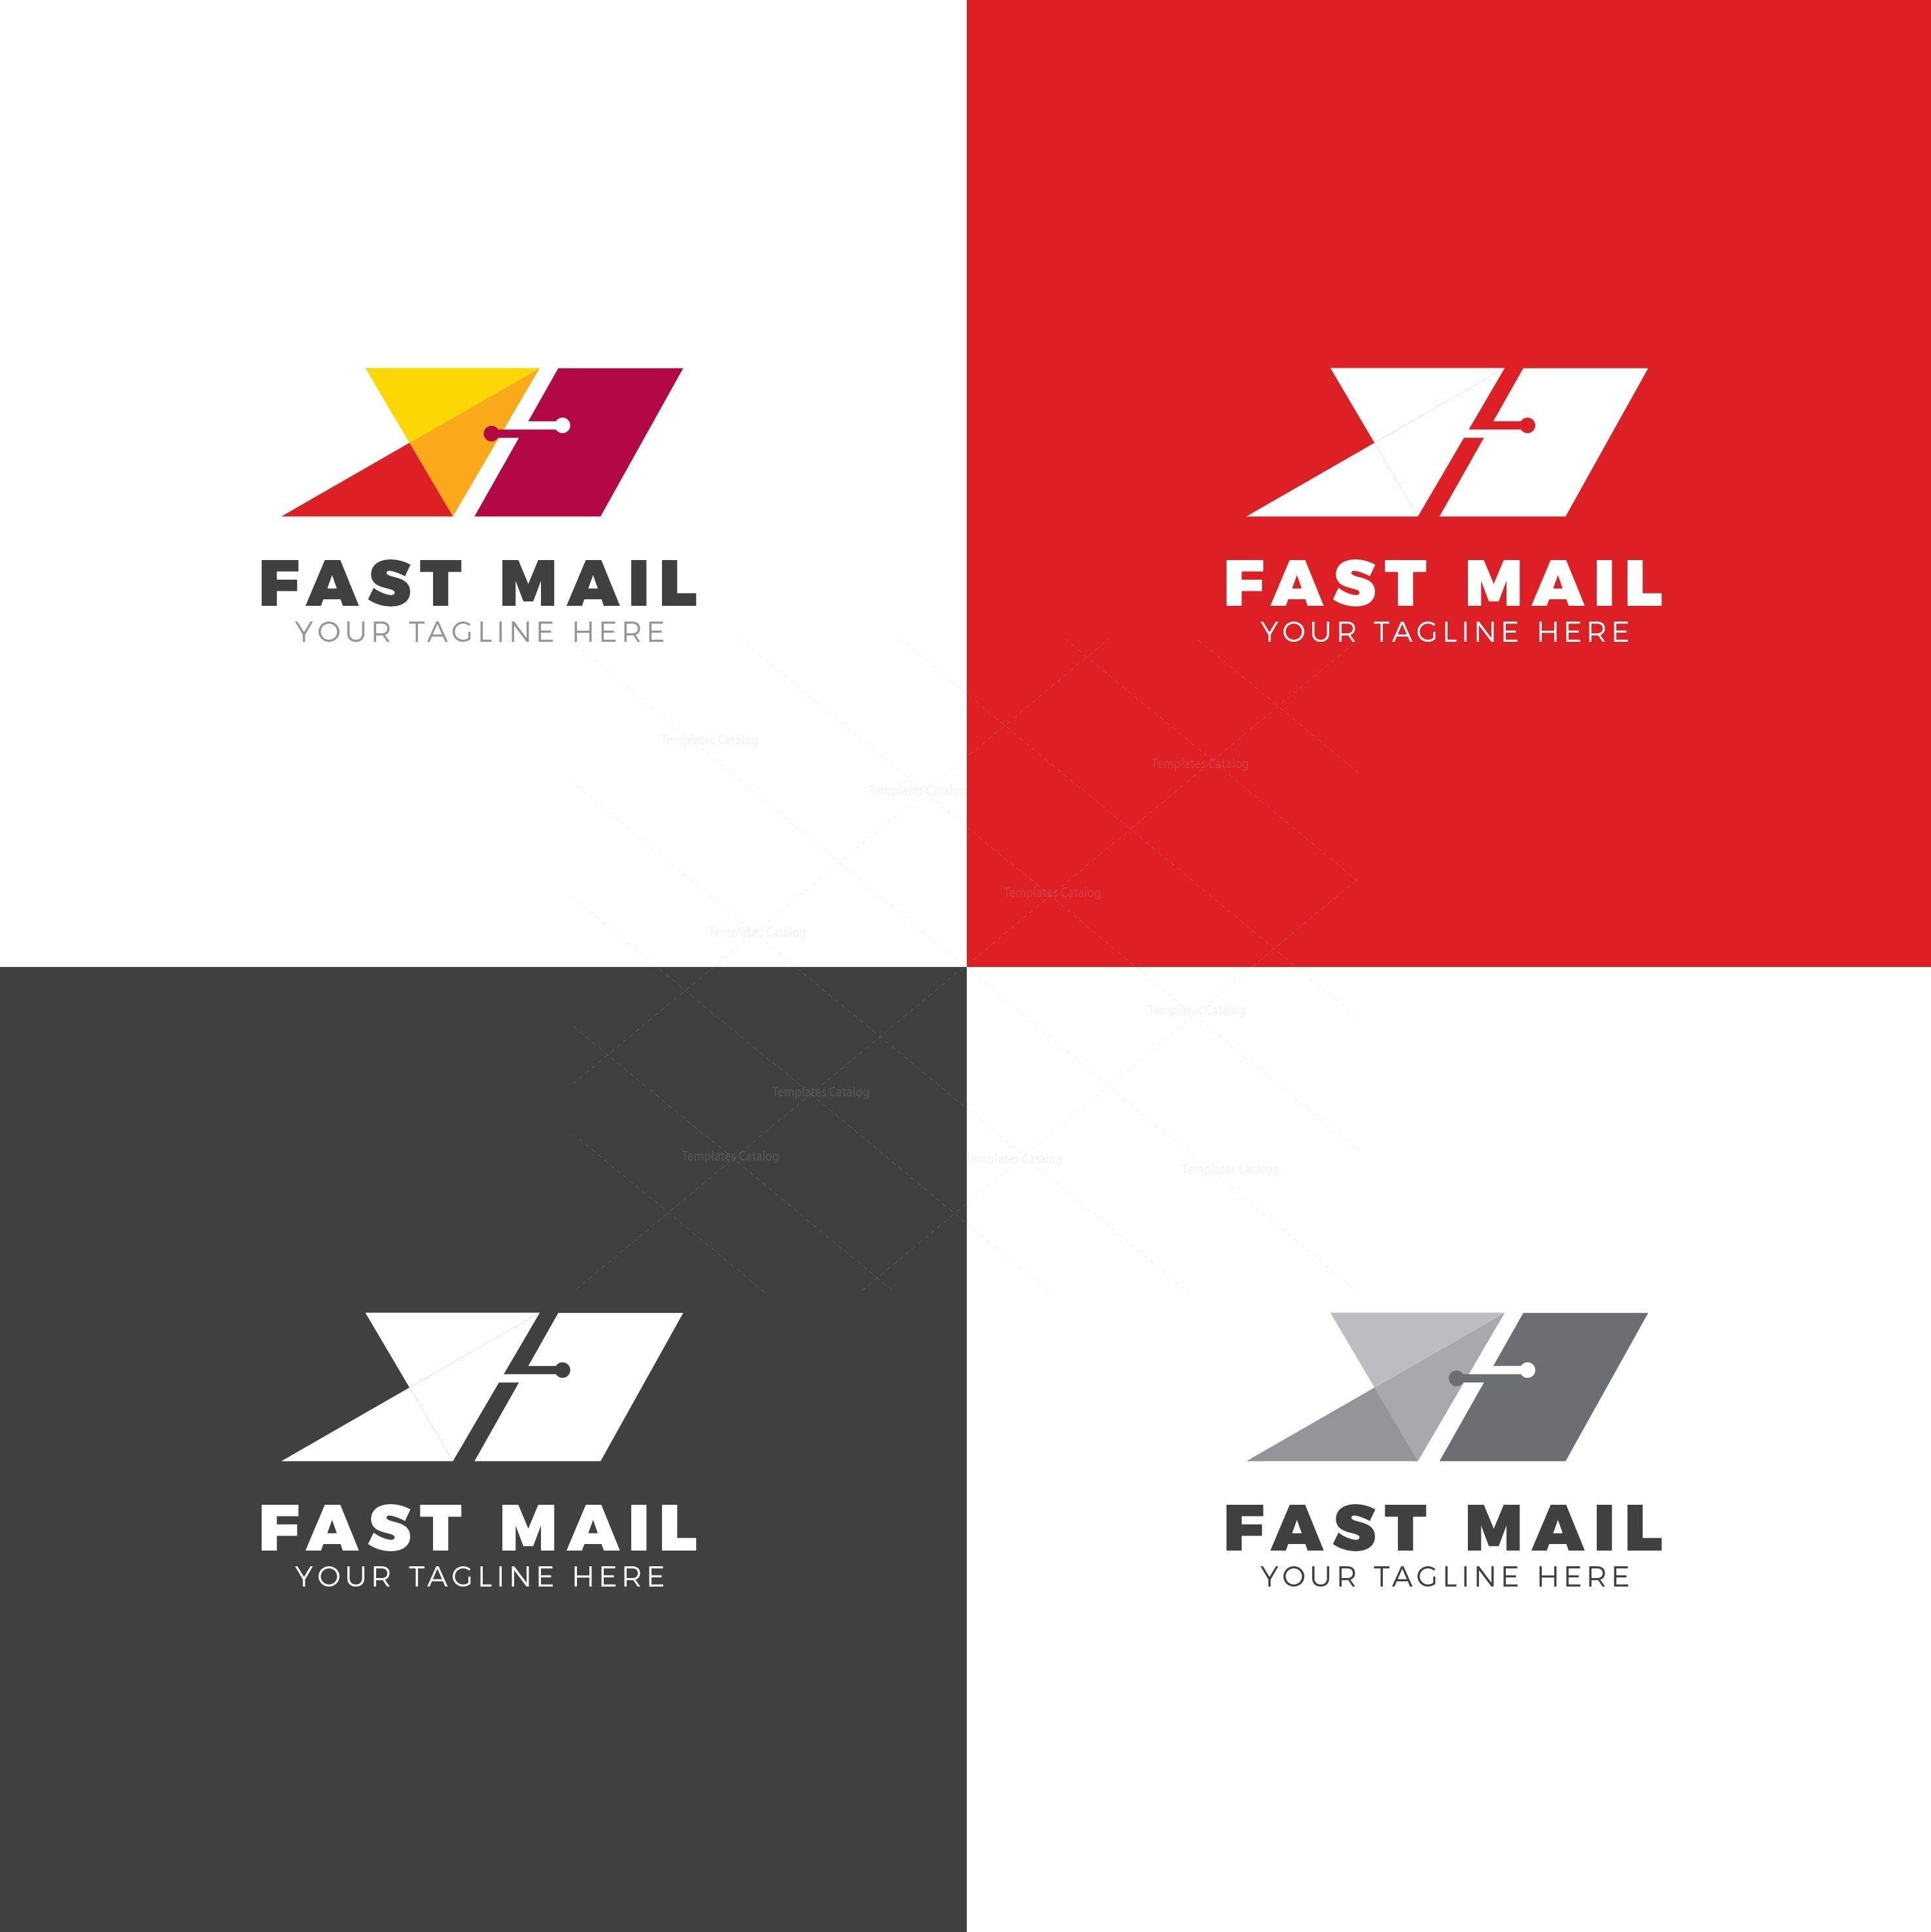 Fastmail Logo - Fast Mail Creative Logo Design Template 001742 - Template Catalog